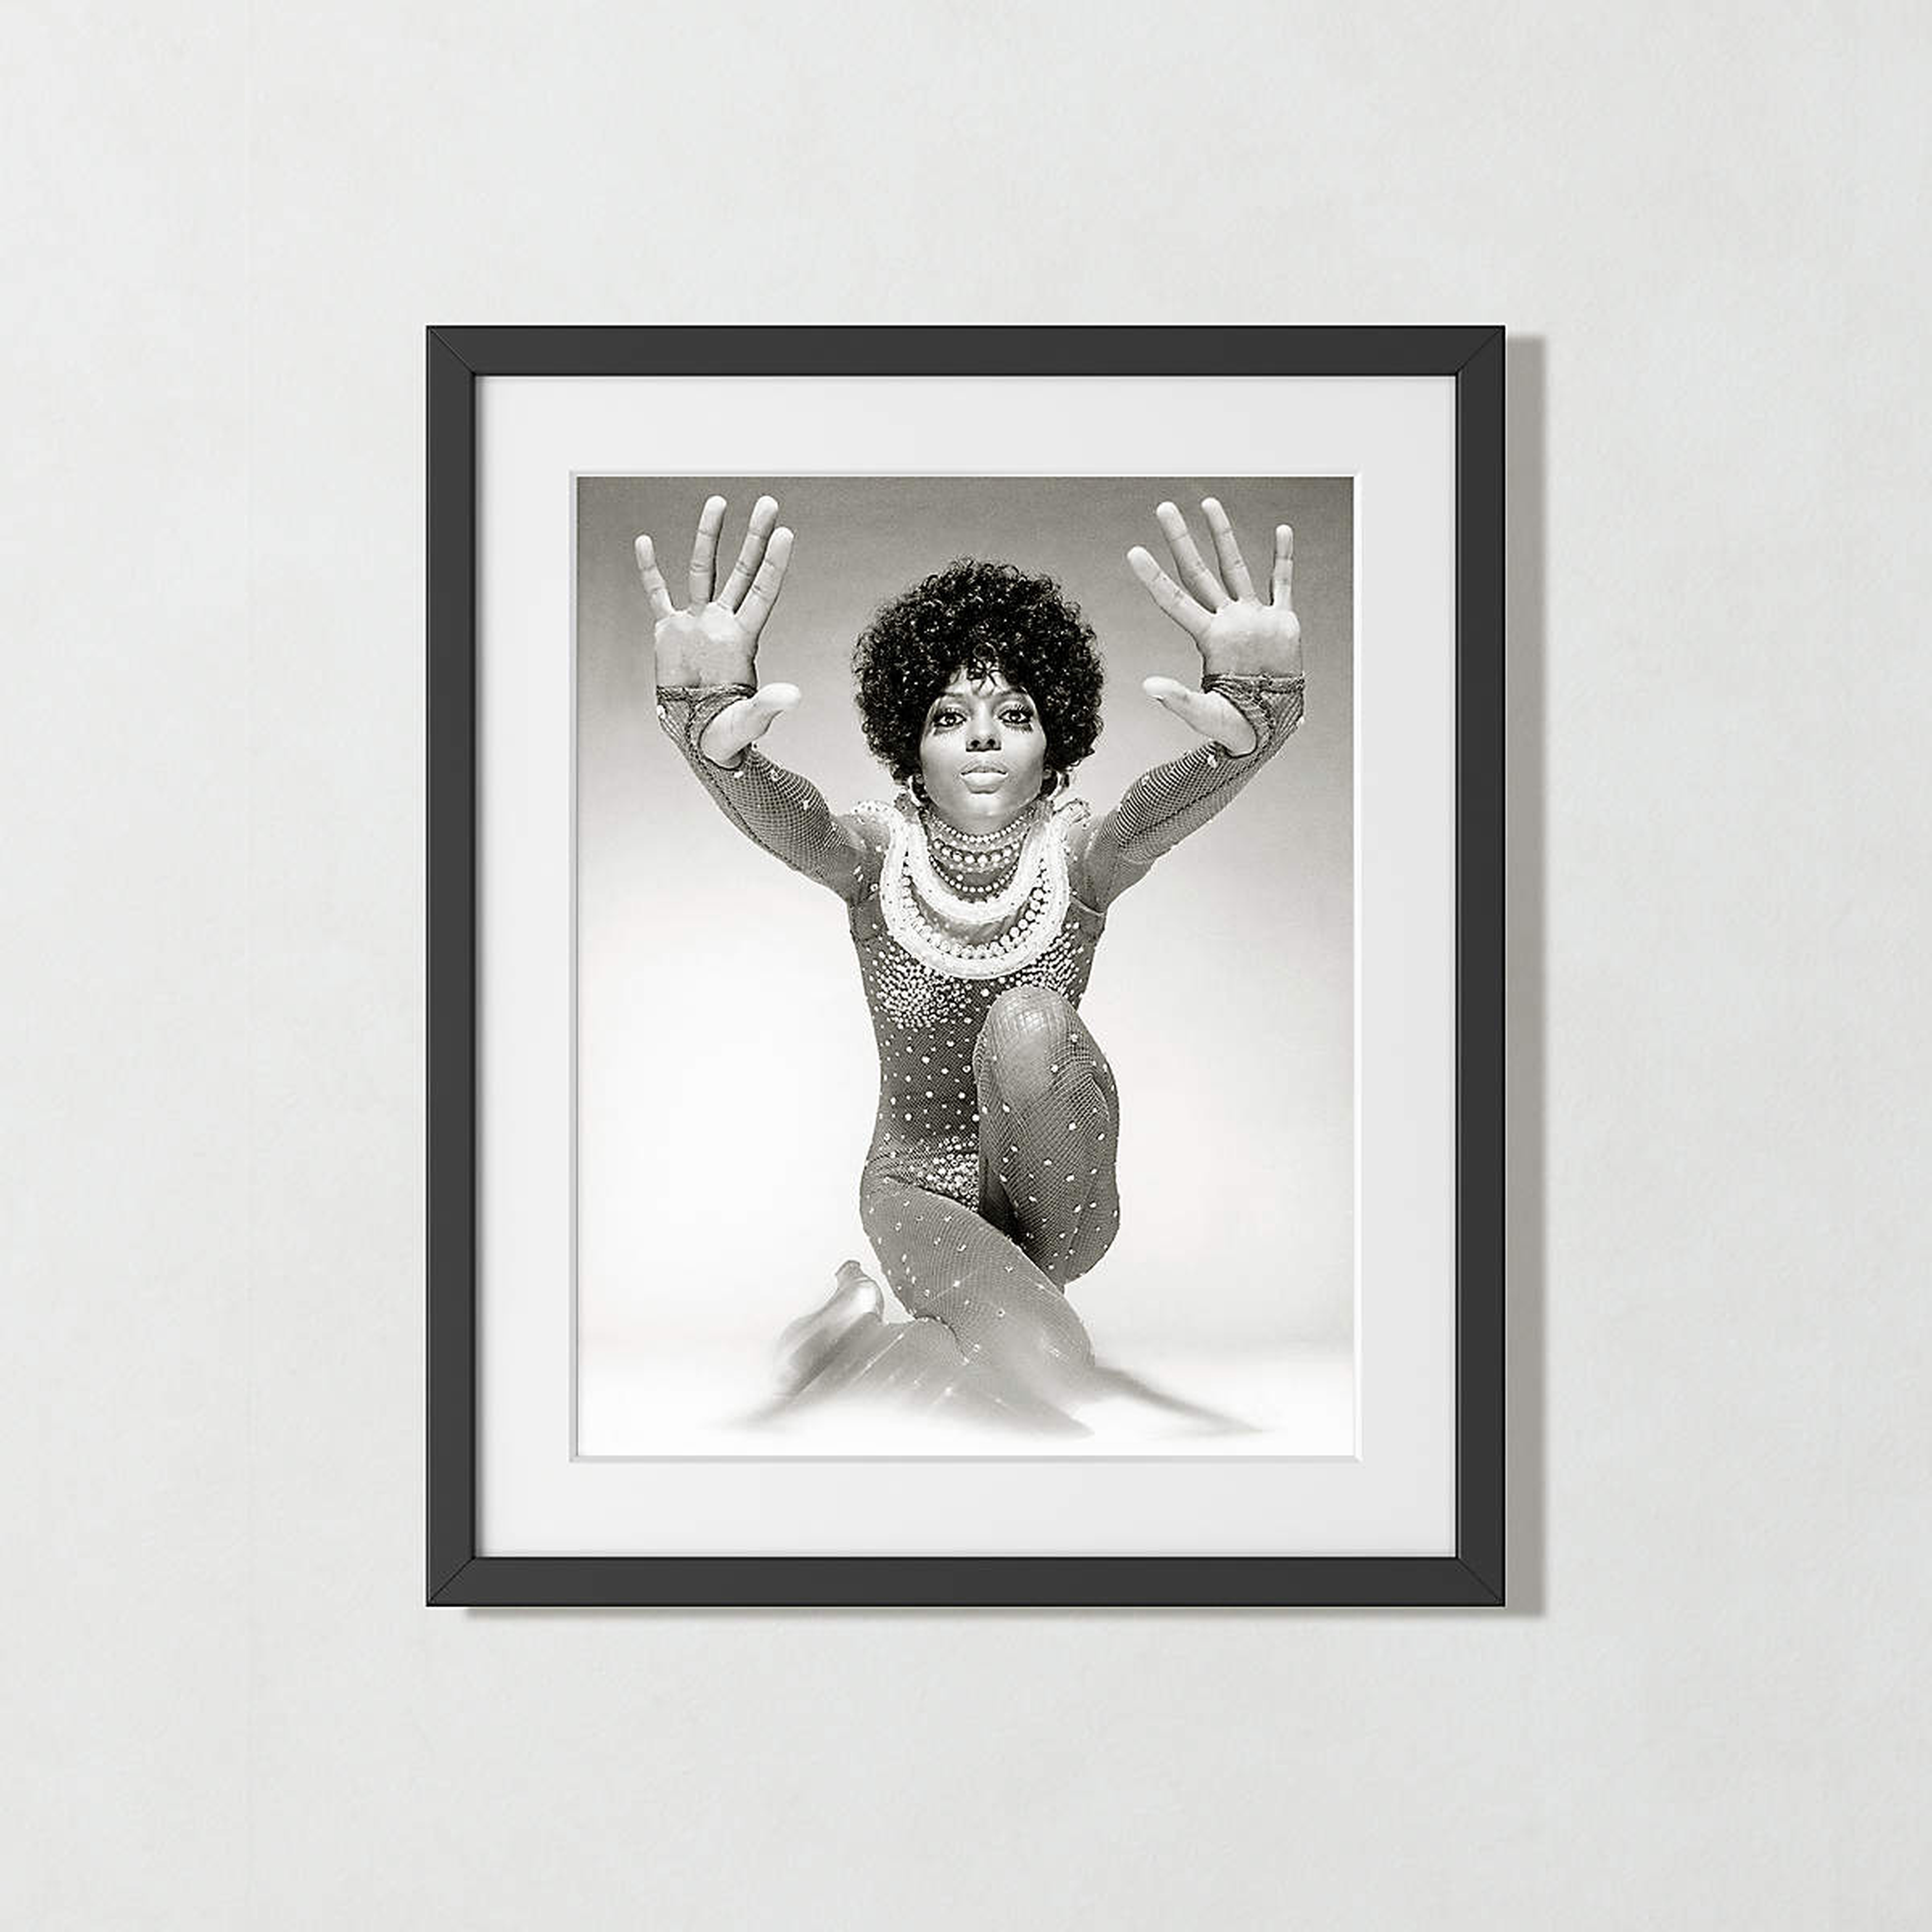 'Diana Ross Reaching Out' Photographic Print in Black Frame 25.5"x21.5" - CB2